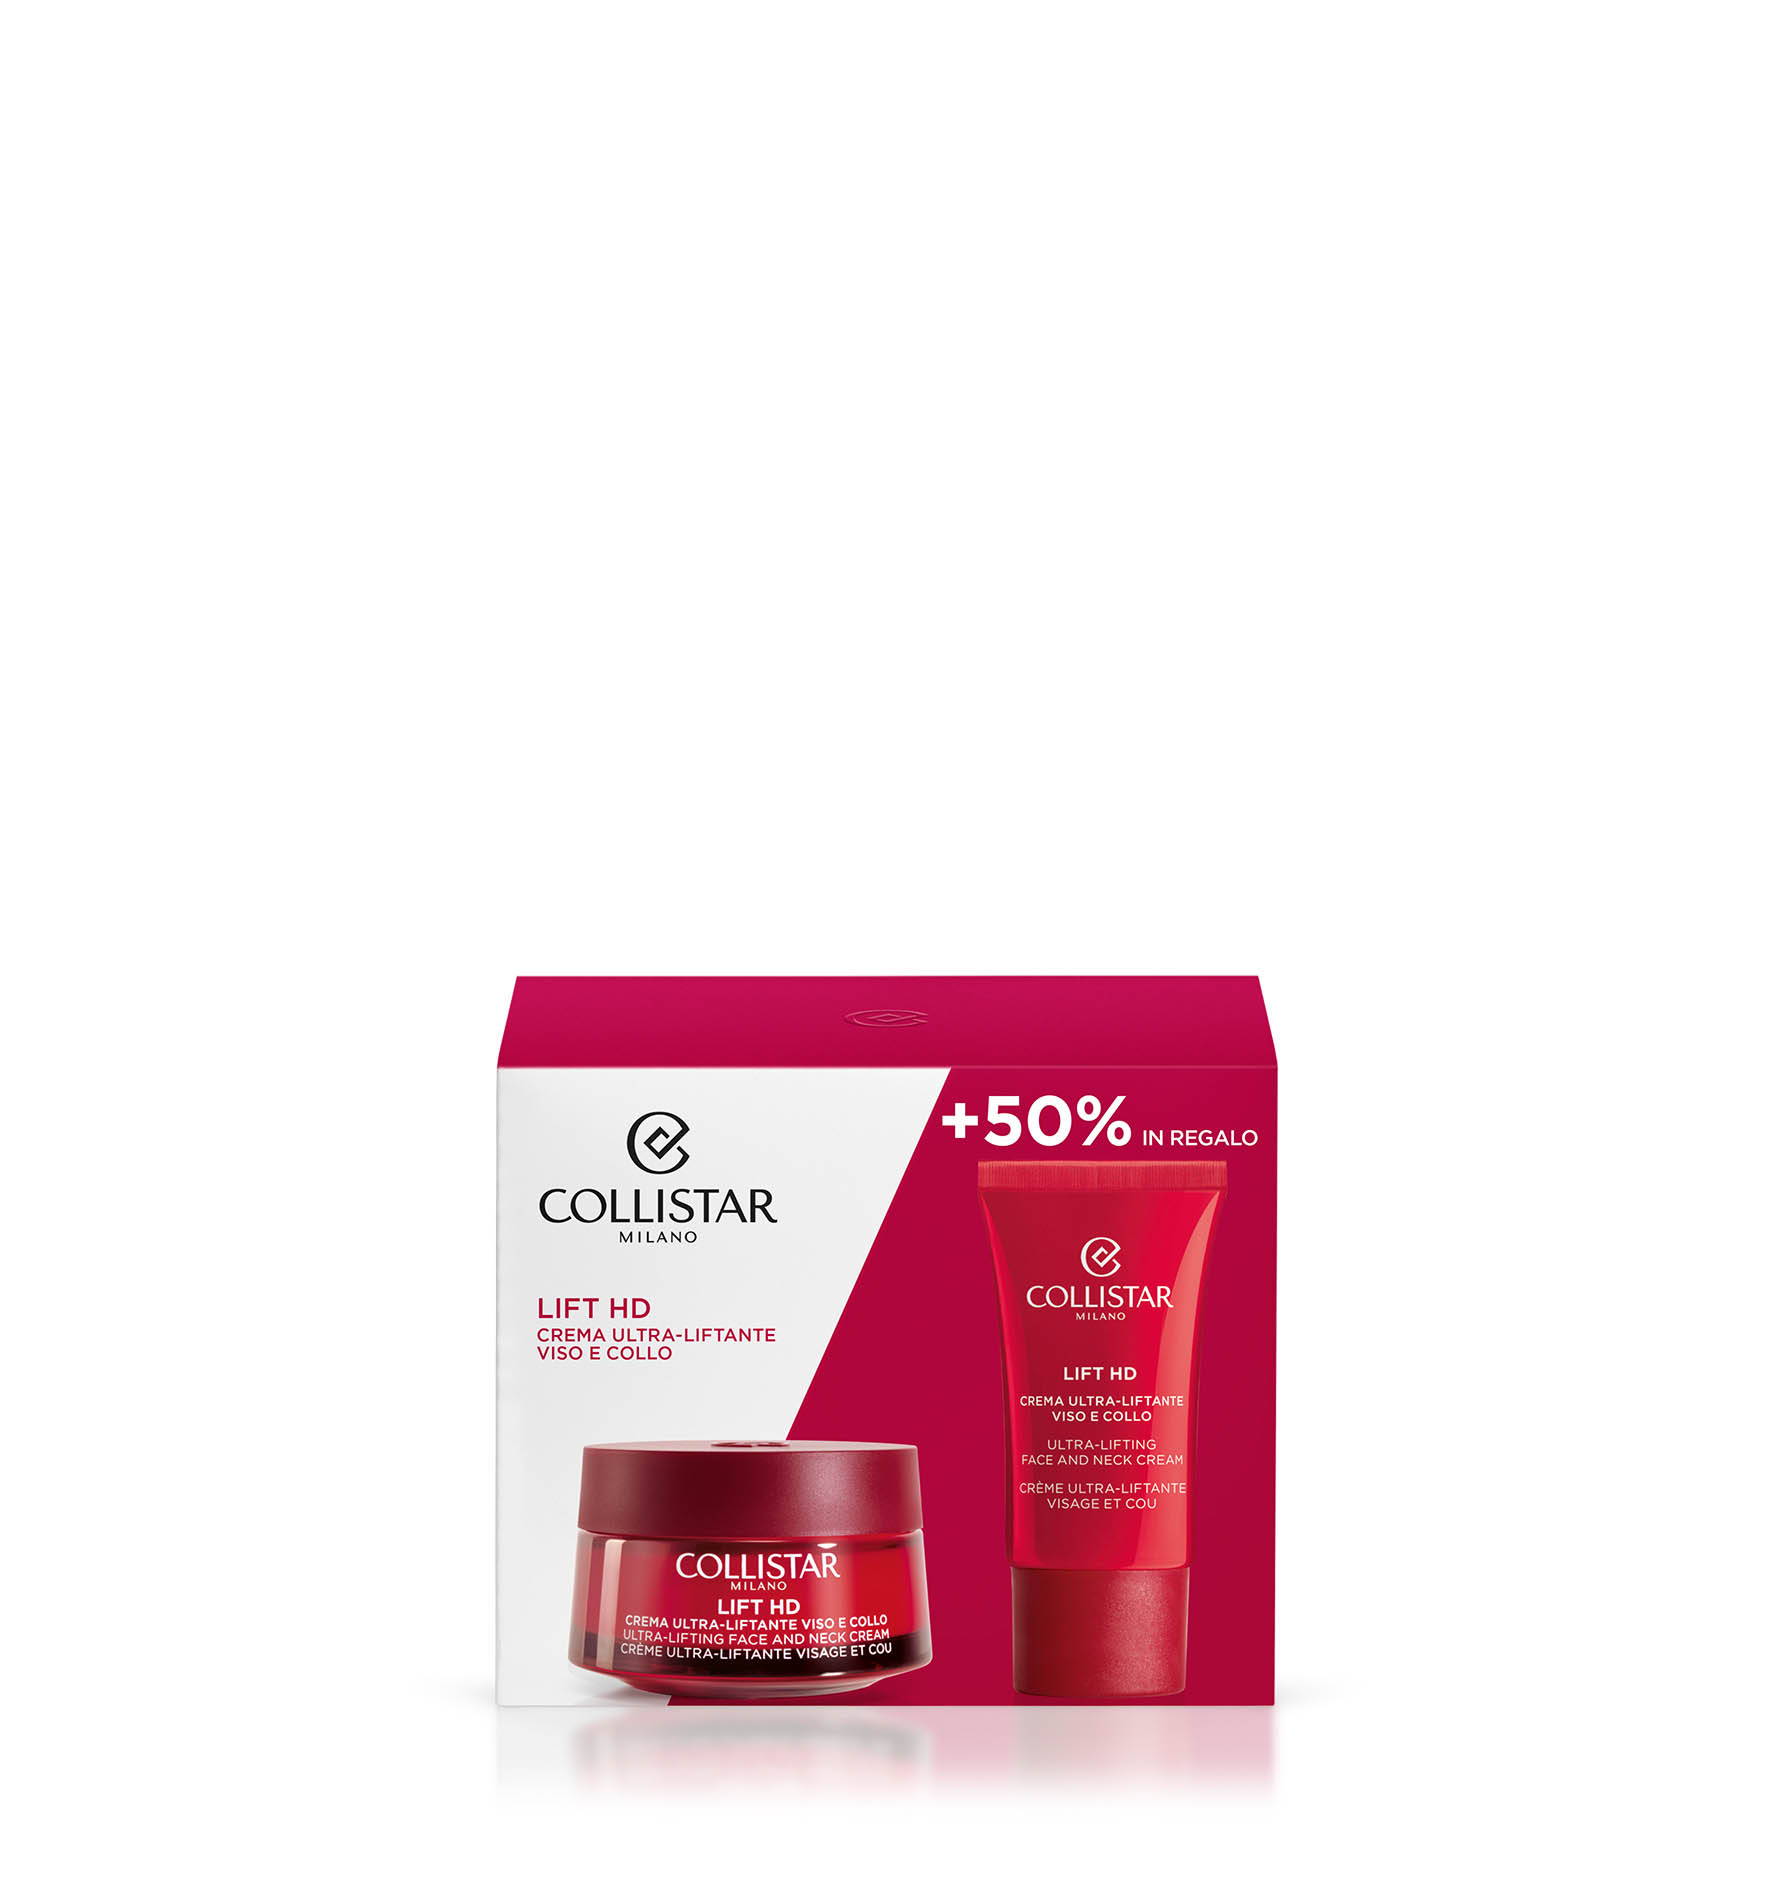 LIFT HD ULTRA-LIFTING FACE AND NECK CREAM 50 ml SET - Lifting | Collistar - Shop Online Ufficiale